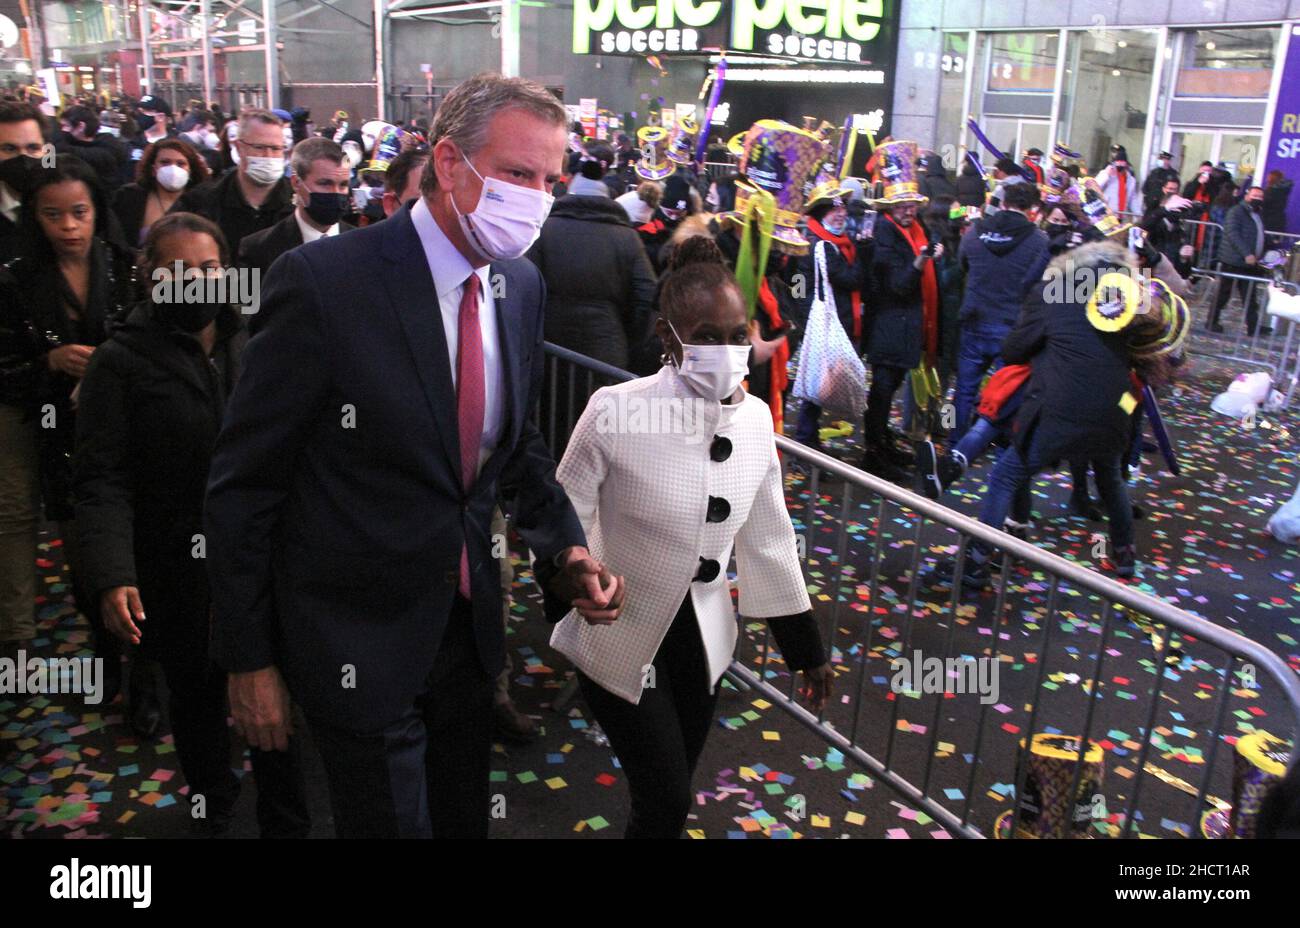 New York, USA. 1st Jan, 2022. (NEW) Eric Adams now officially declared as New York City Mayor at Times Square. January 1, 2022, New York, USA: Eric Adams is now officially declared as New York City new Mayor during the Ball drop on New YearÃ¢â‚¬â„¢s Eve at Times Square, New York with the presence of outgoing Mayor, Bill de Blasio and his wife and other dignitaries. Only about 15,000 people with proof of vaccination and use of face masks are allowed to gather around Times Square during the Ball Drop in an effort to contain the spread of Omicron, the new COVID-19 variant which has caused an in Stock Photo